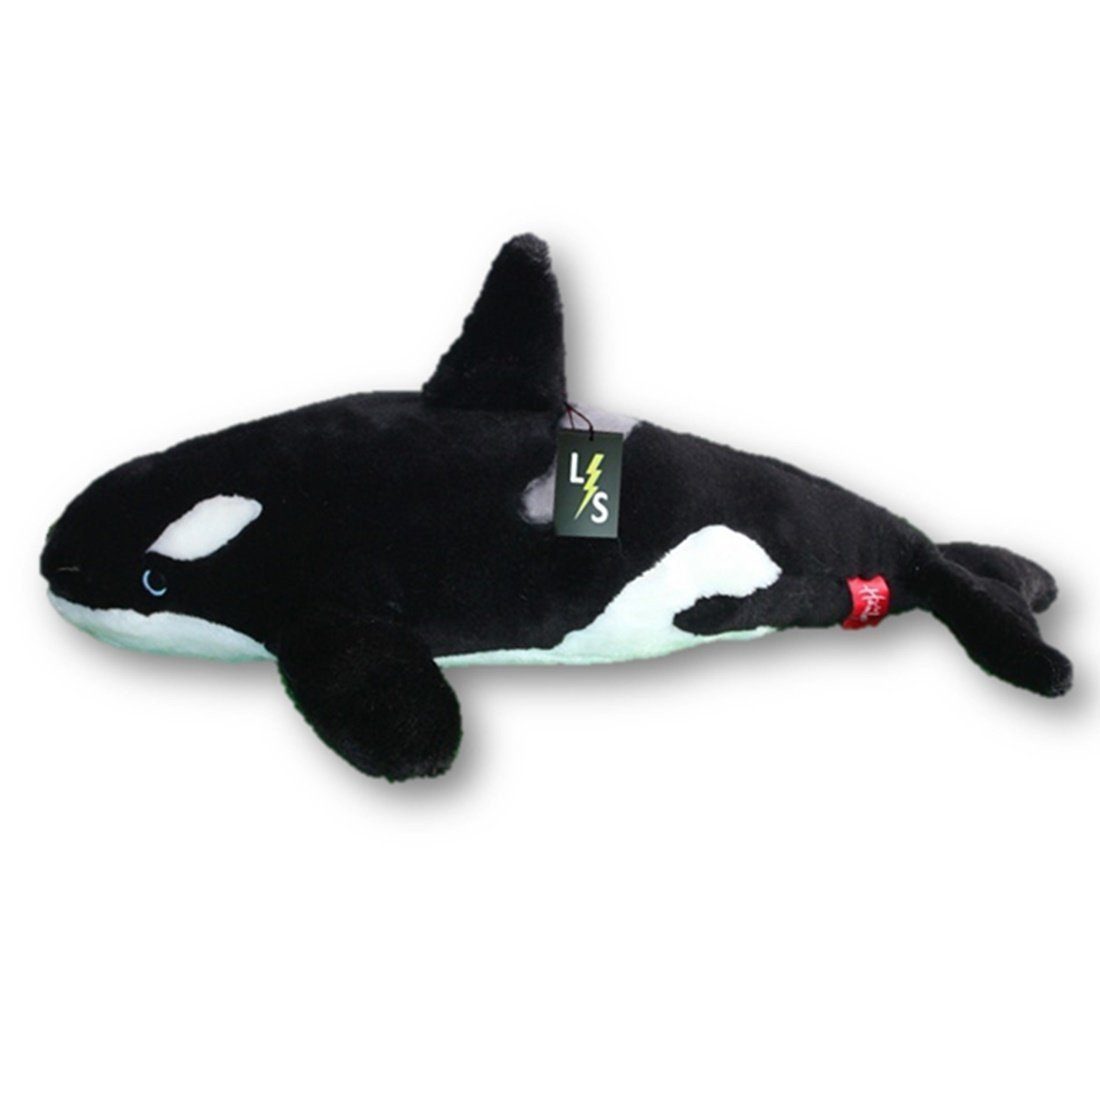 whale stuffed toy